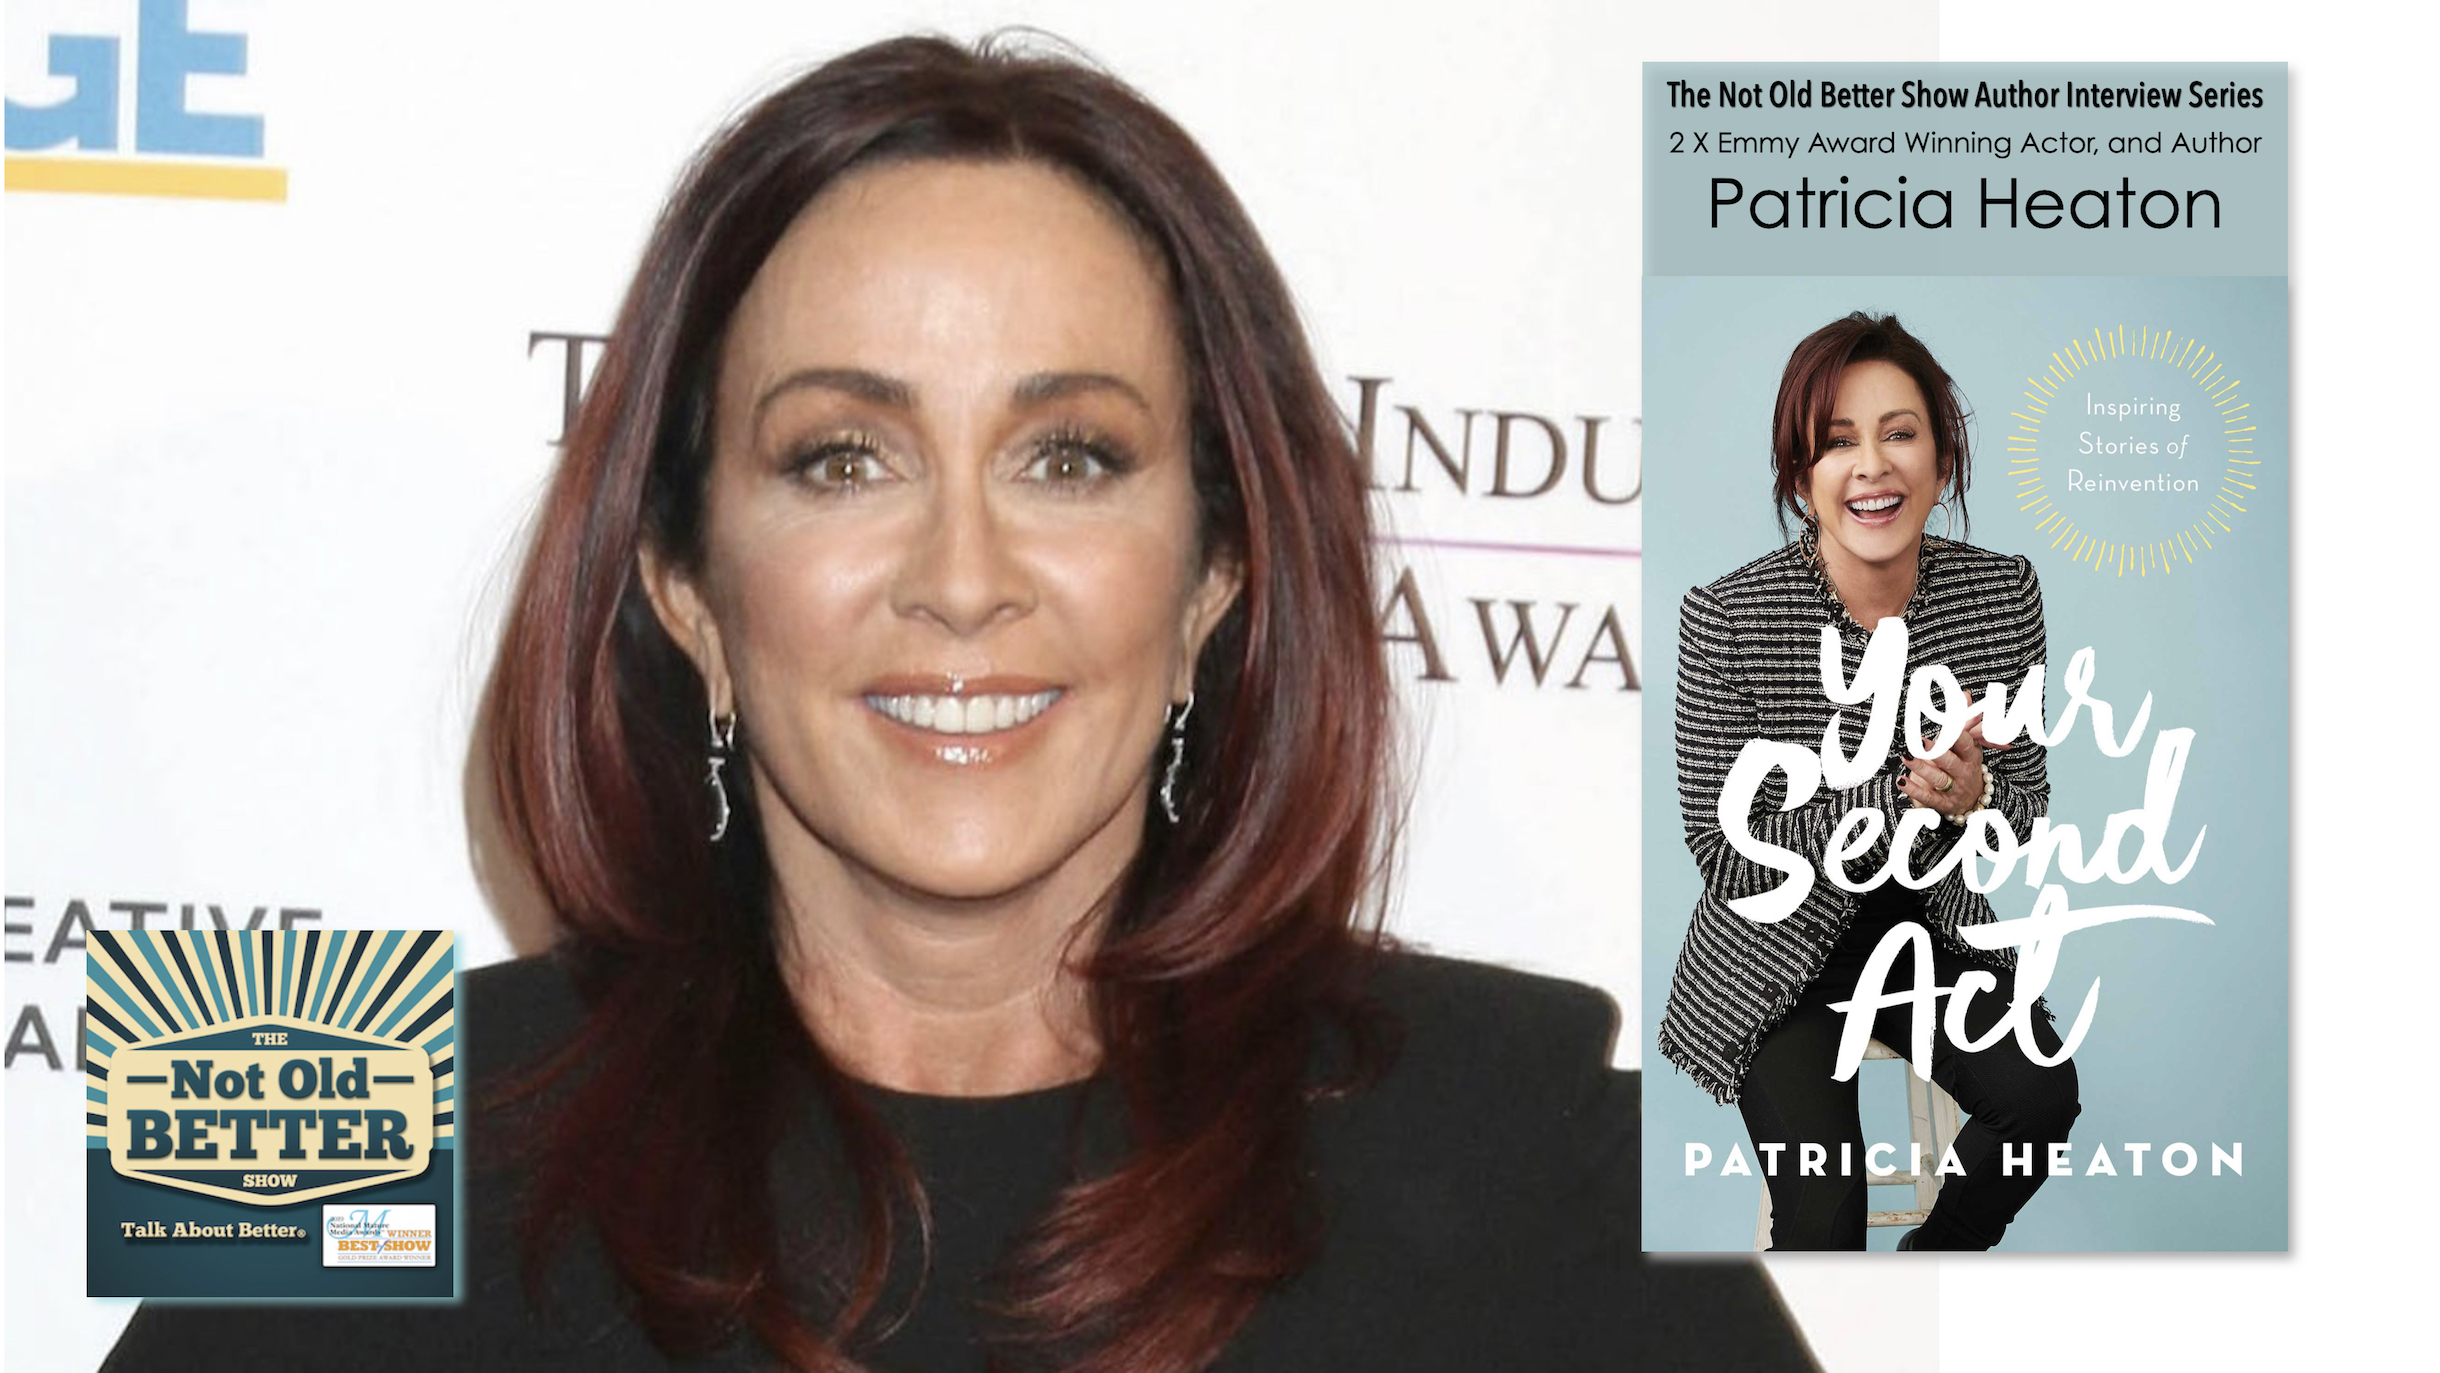 Our Favorite TV Mom Patricia Heaton on Your Second Act and Why She Quit Drinking in her 60s